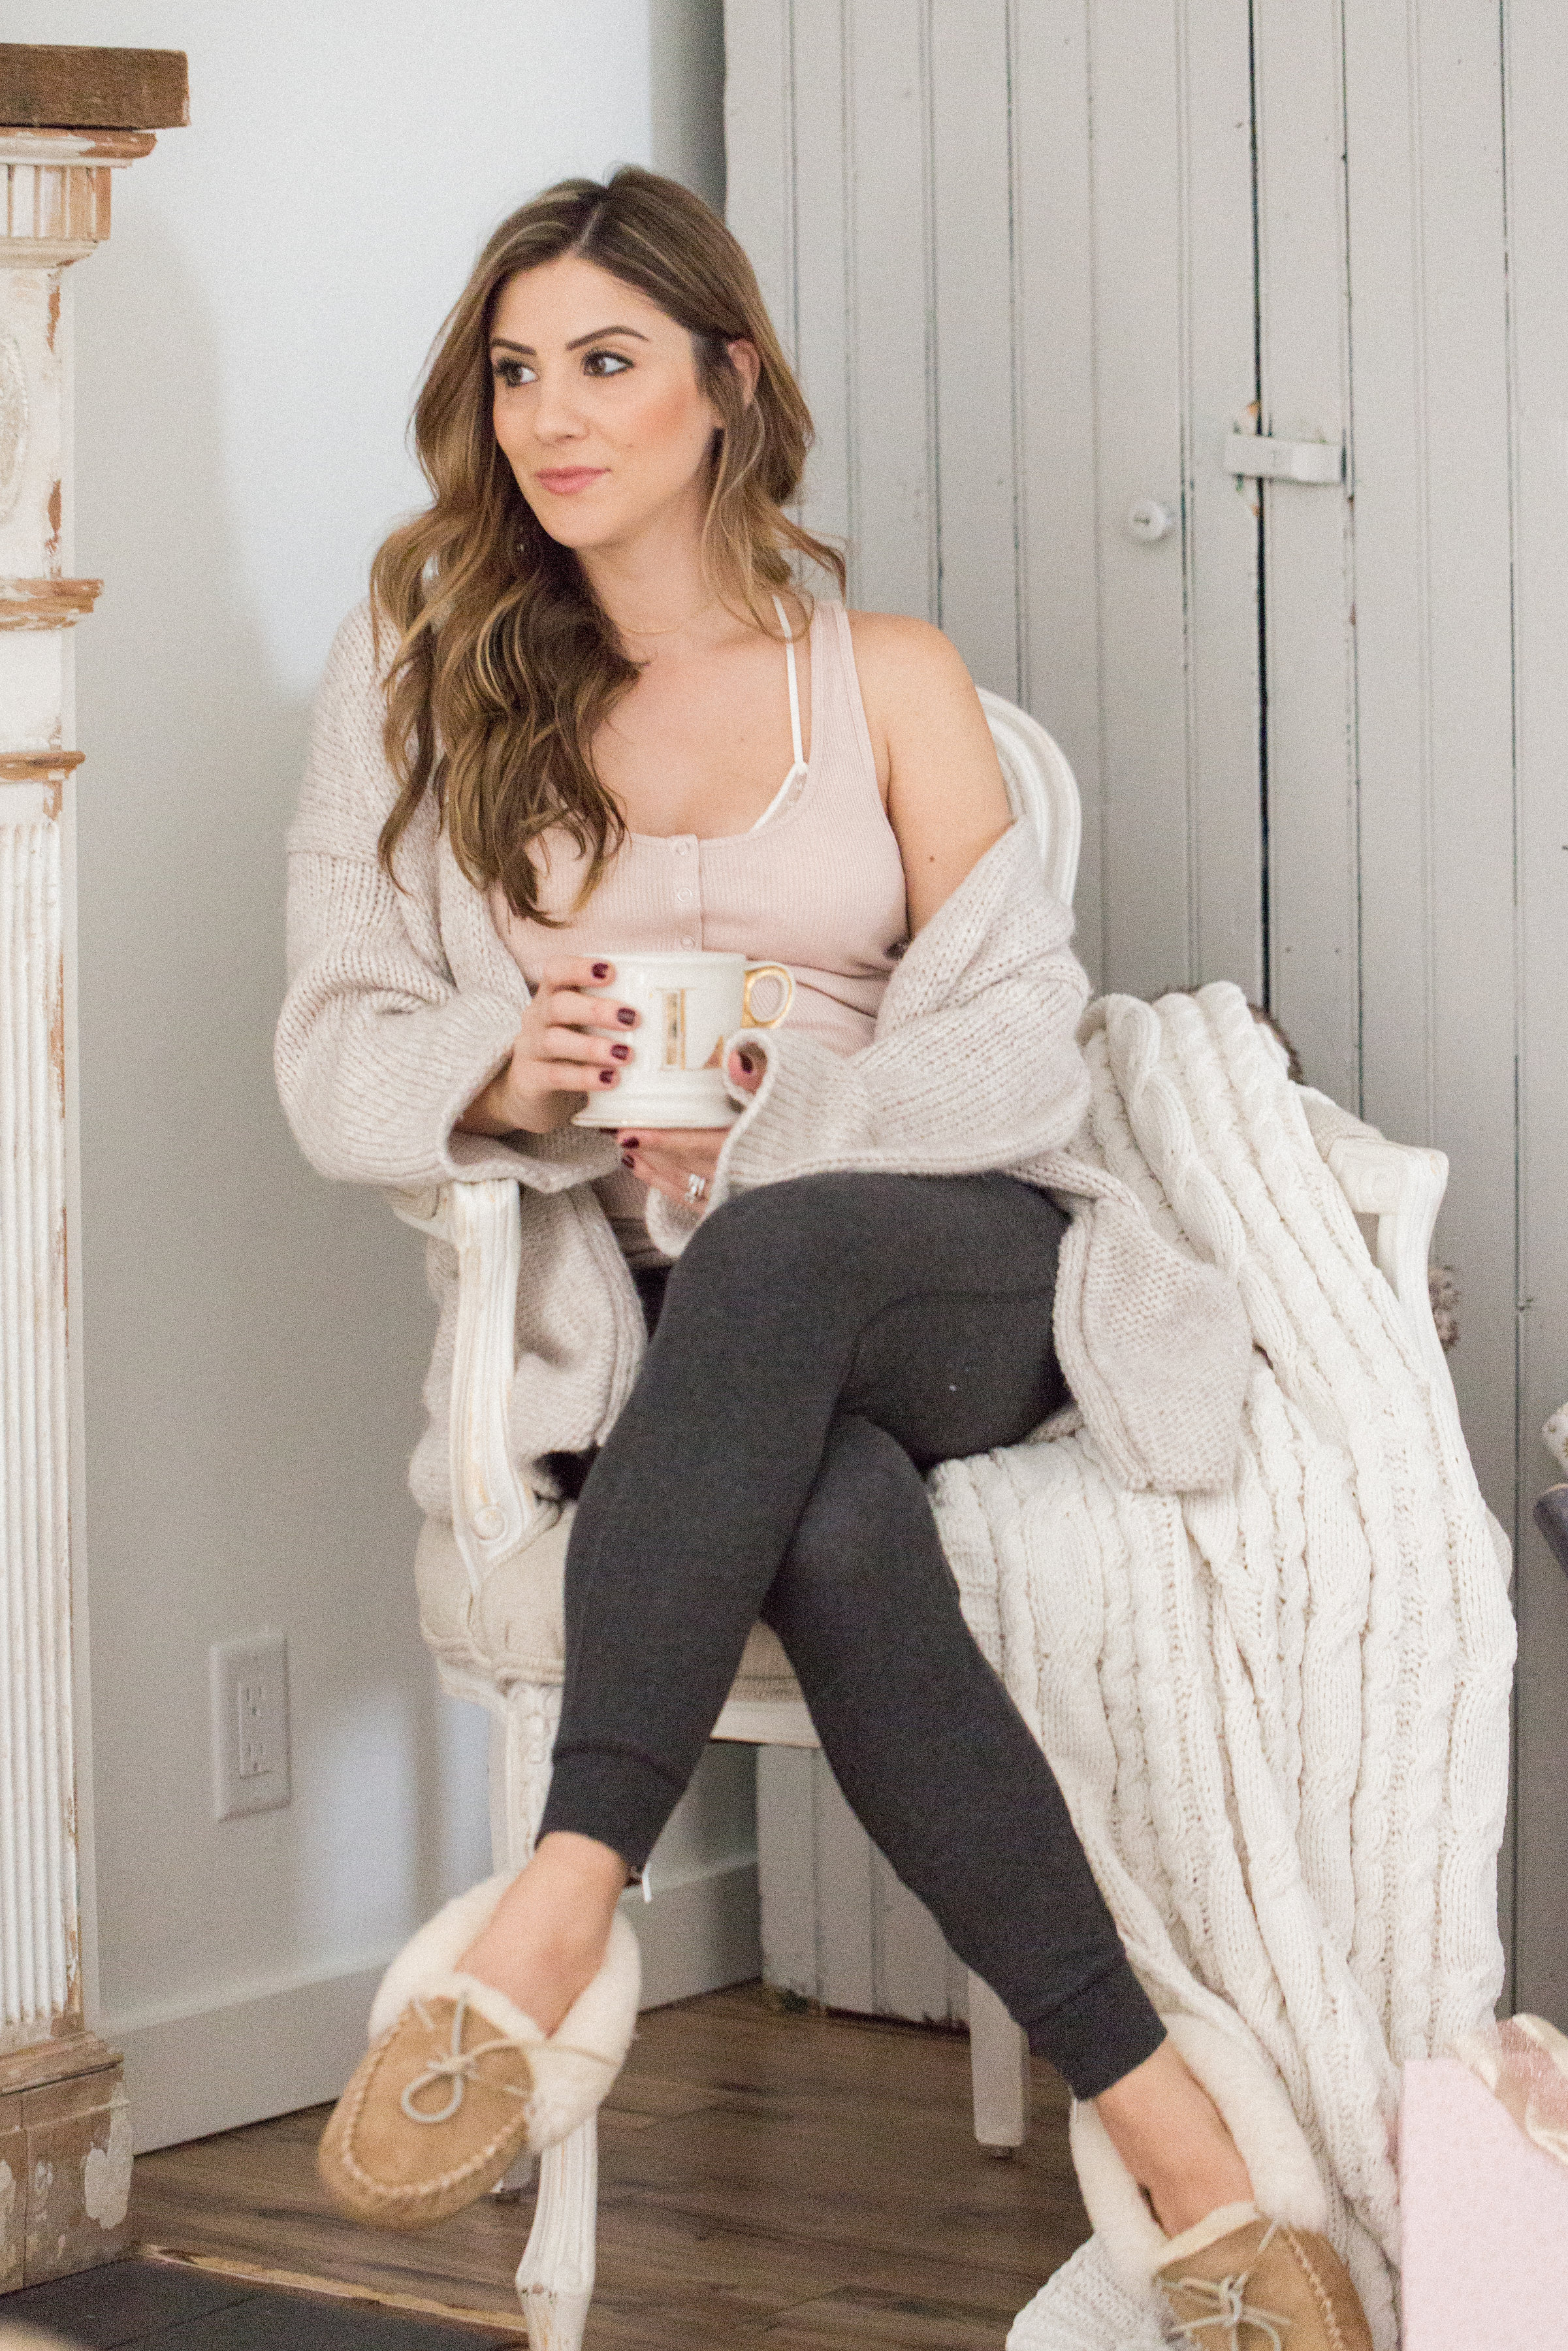 Life and style blogger Lauren McBride shares her Holiday Gift Guide for The Cozy Girl, including a roundup of cozy items to get her through the season.